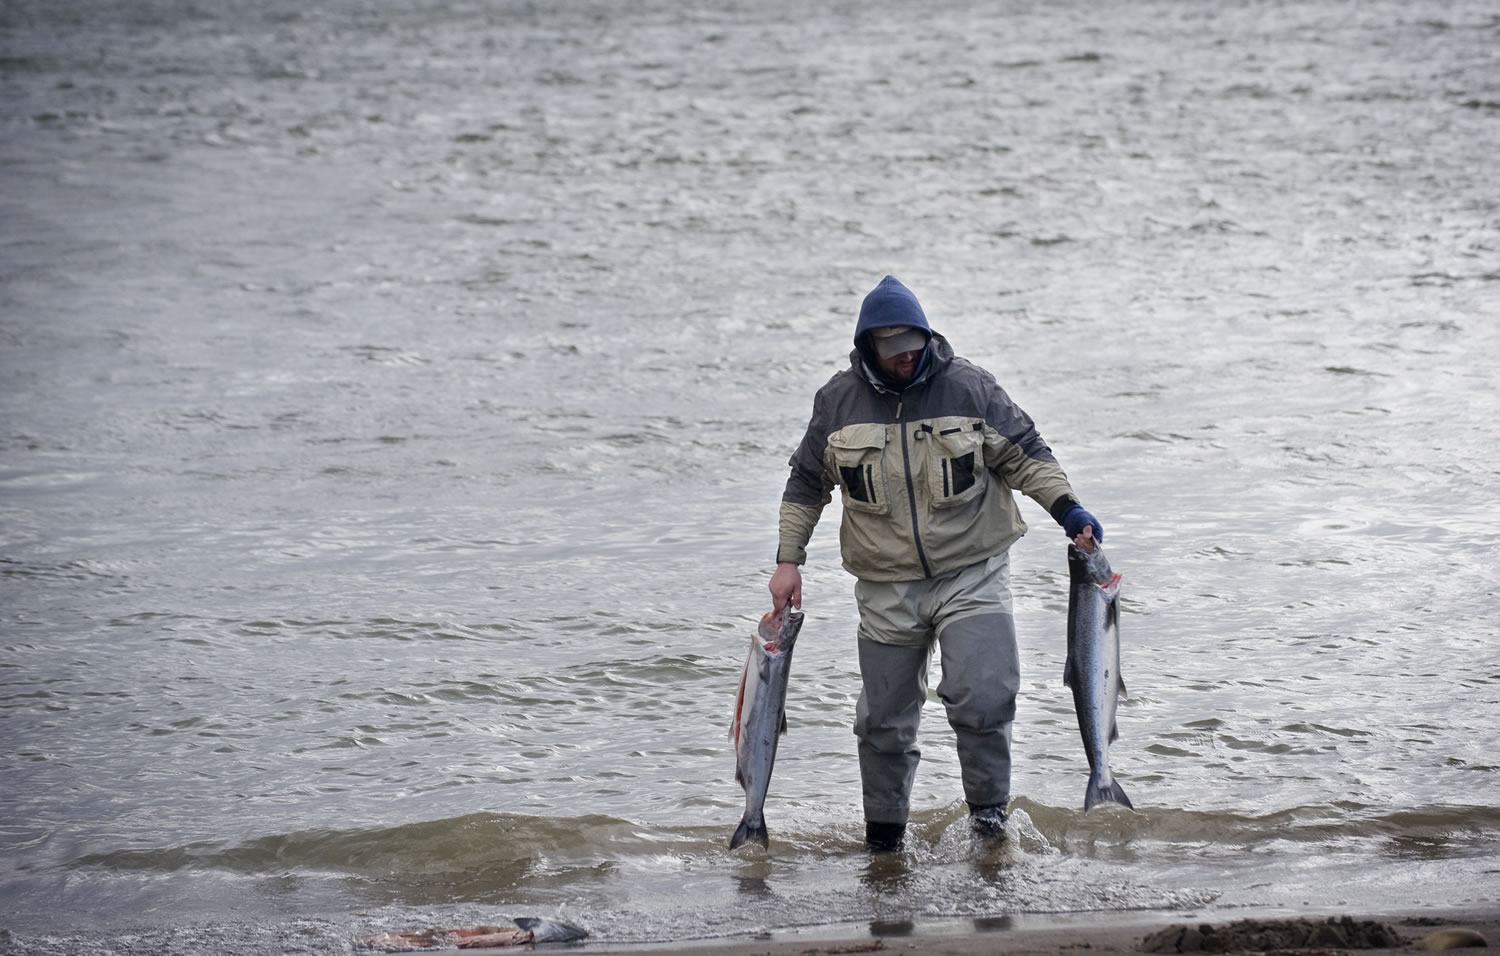 Spring chinook anglers are anticipated to have a good year if water conditions cooperate.